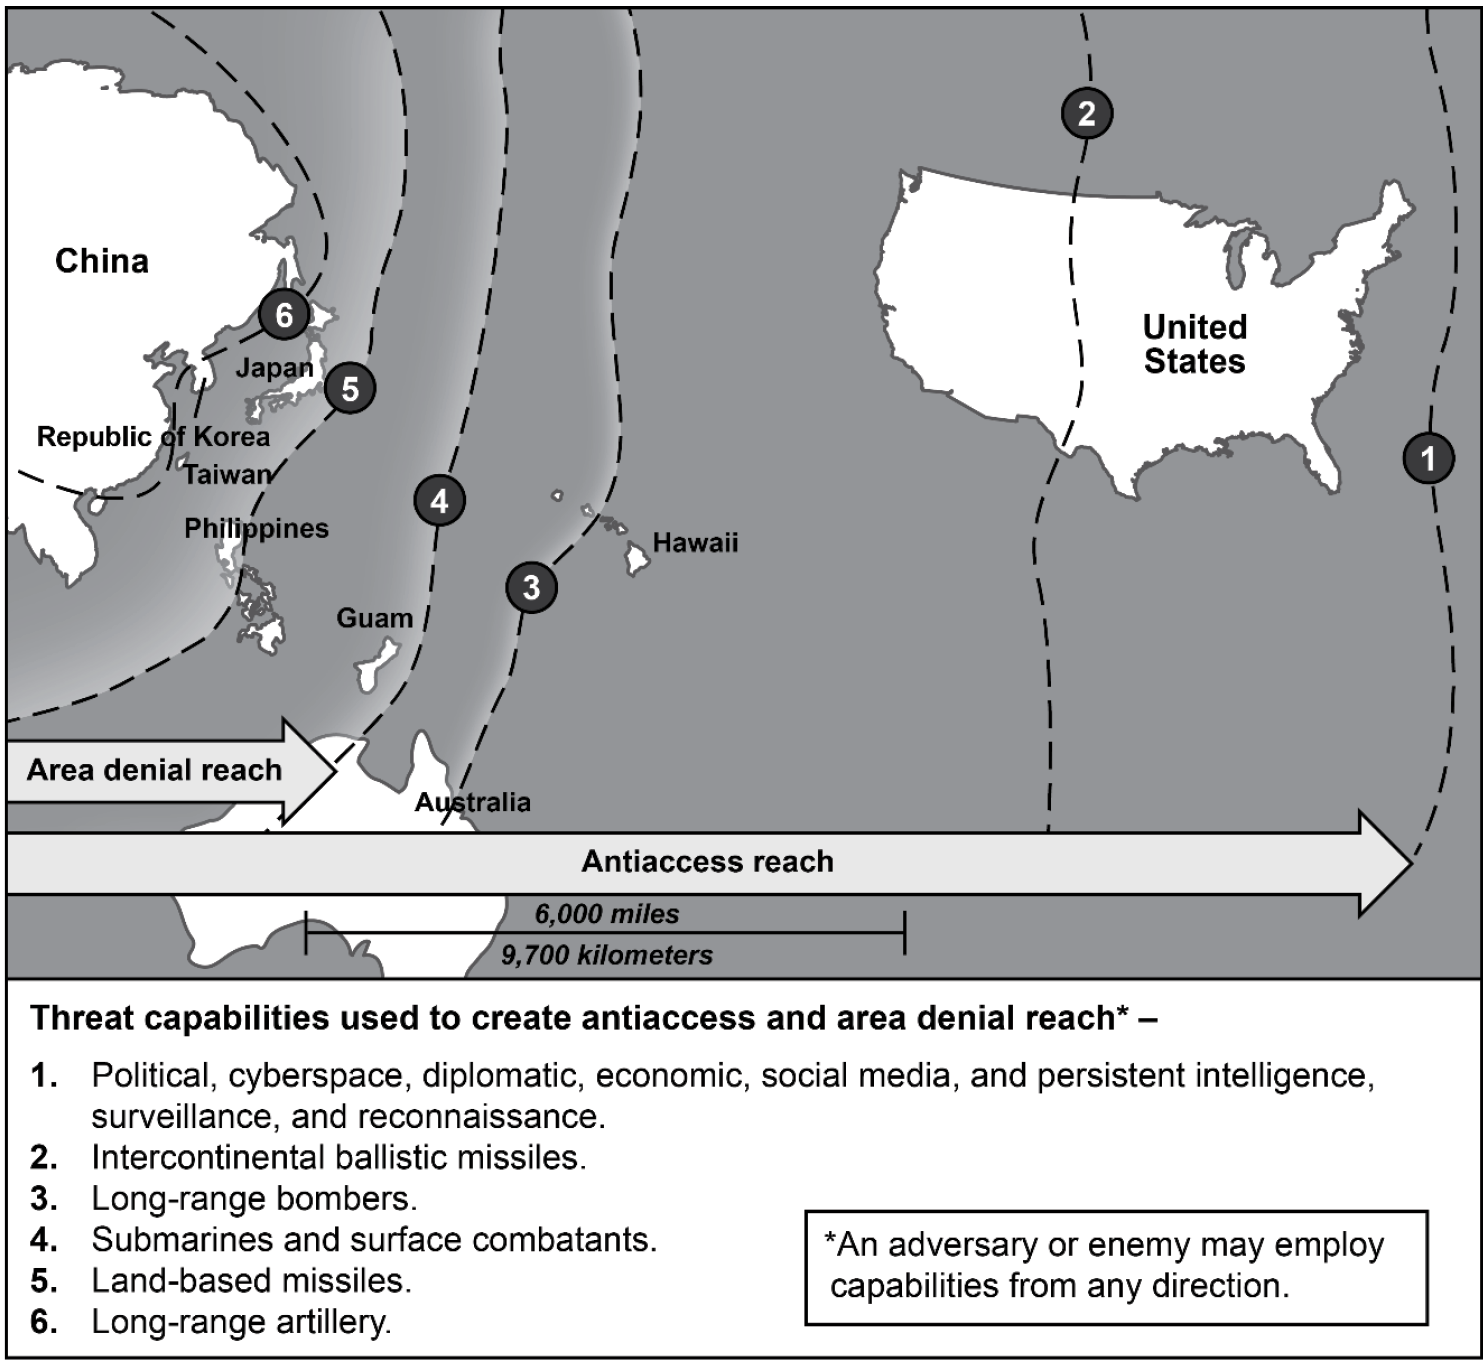 Figure 1. Notional Example of Threat Adversary Preclusion of U.S. Force Projection Using NonLethal, NonKinetic Informational Means (1) to Isolate and Demoralize the United States, Kindle Civic Instability, and Manipulate Public Opinion.